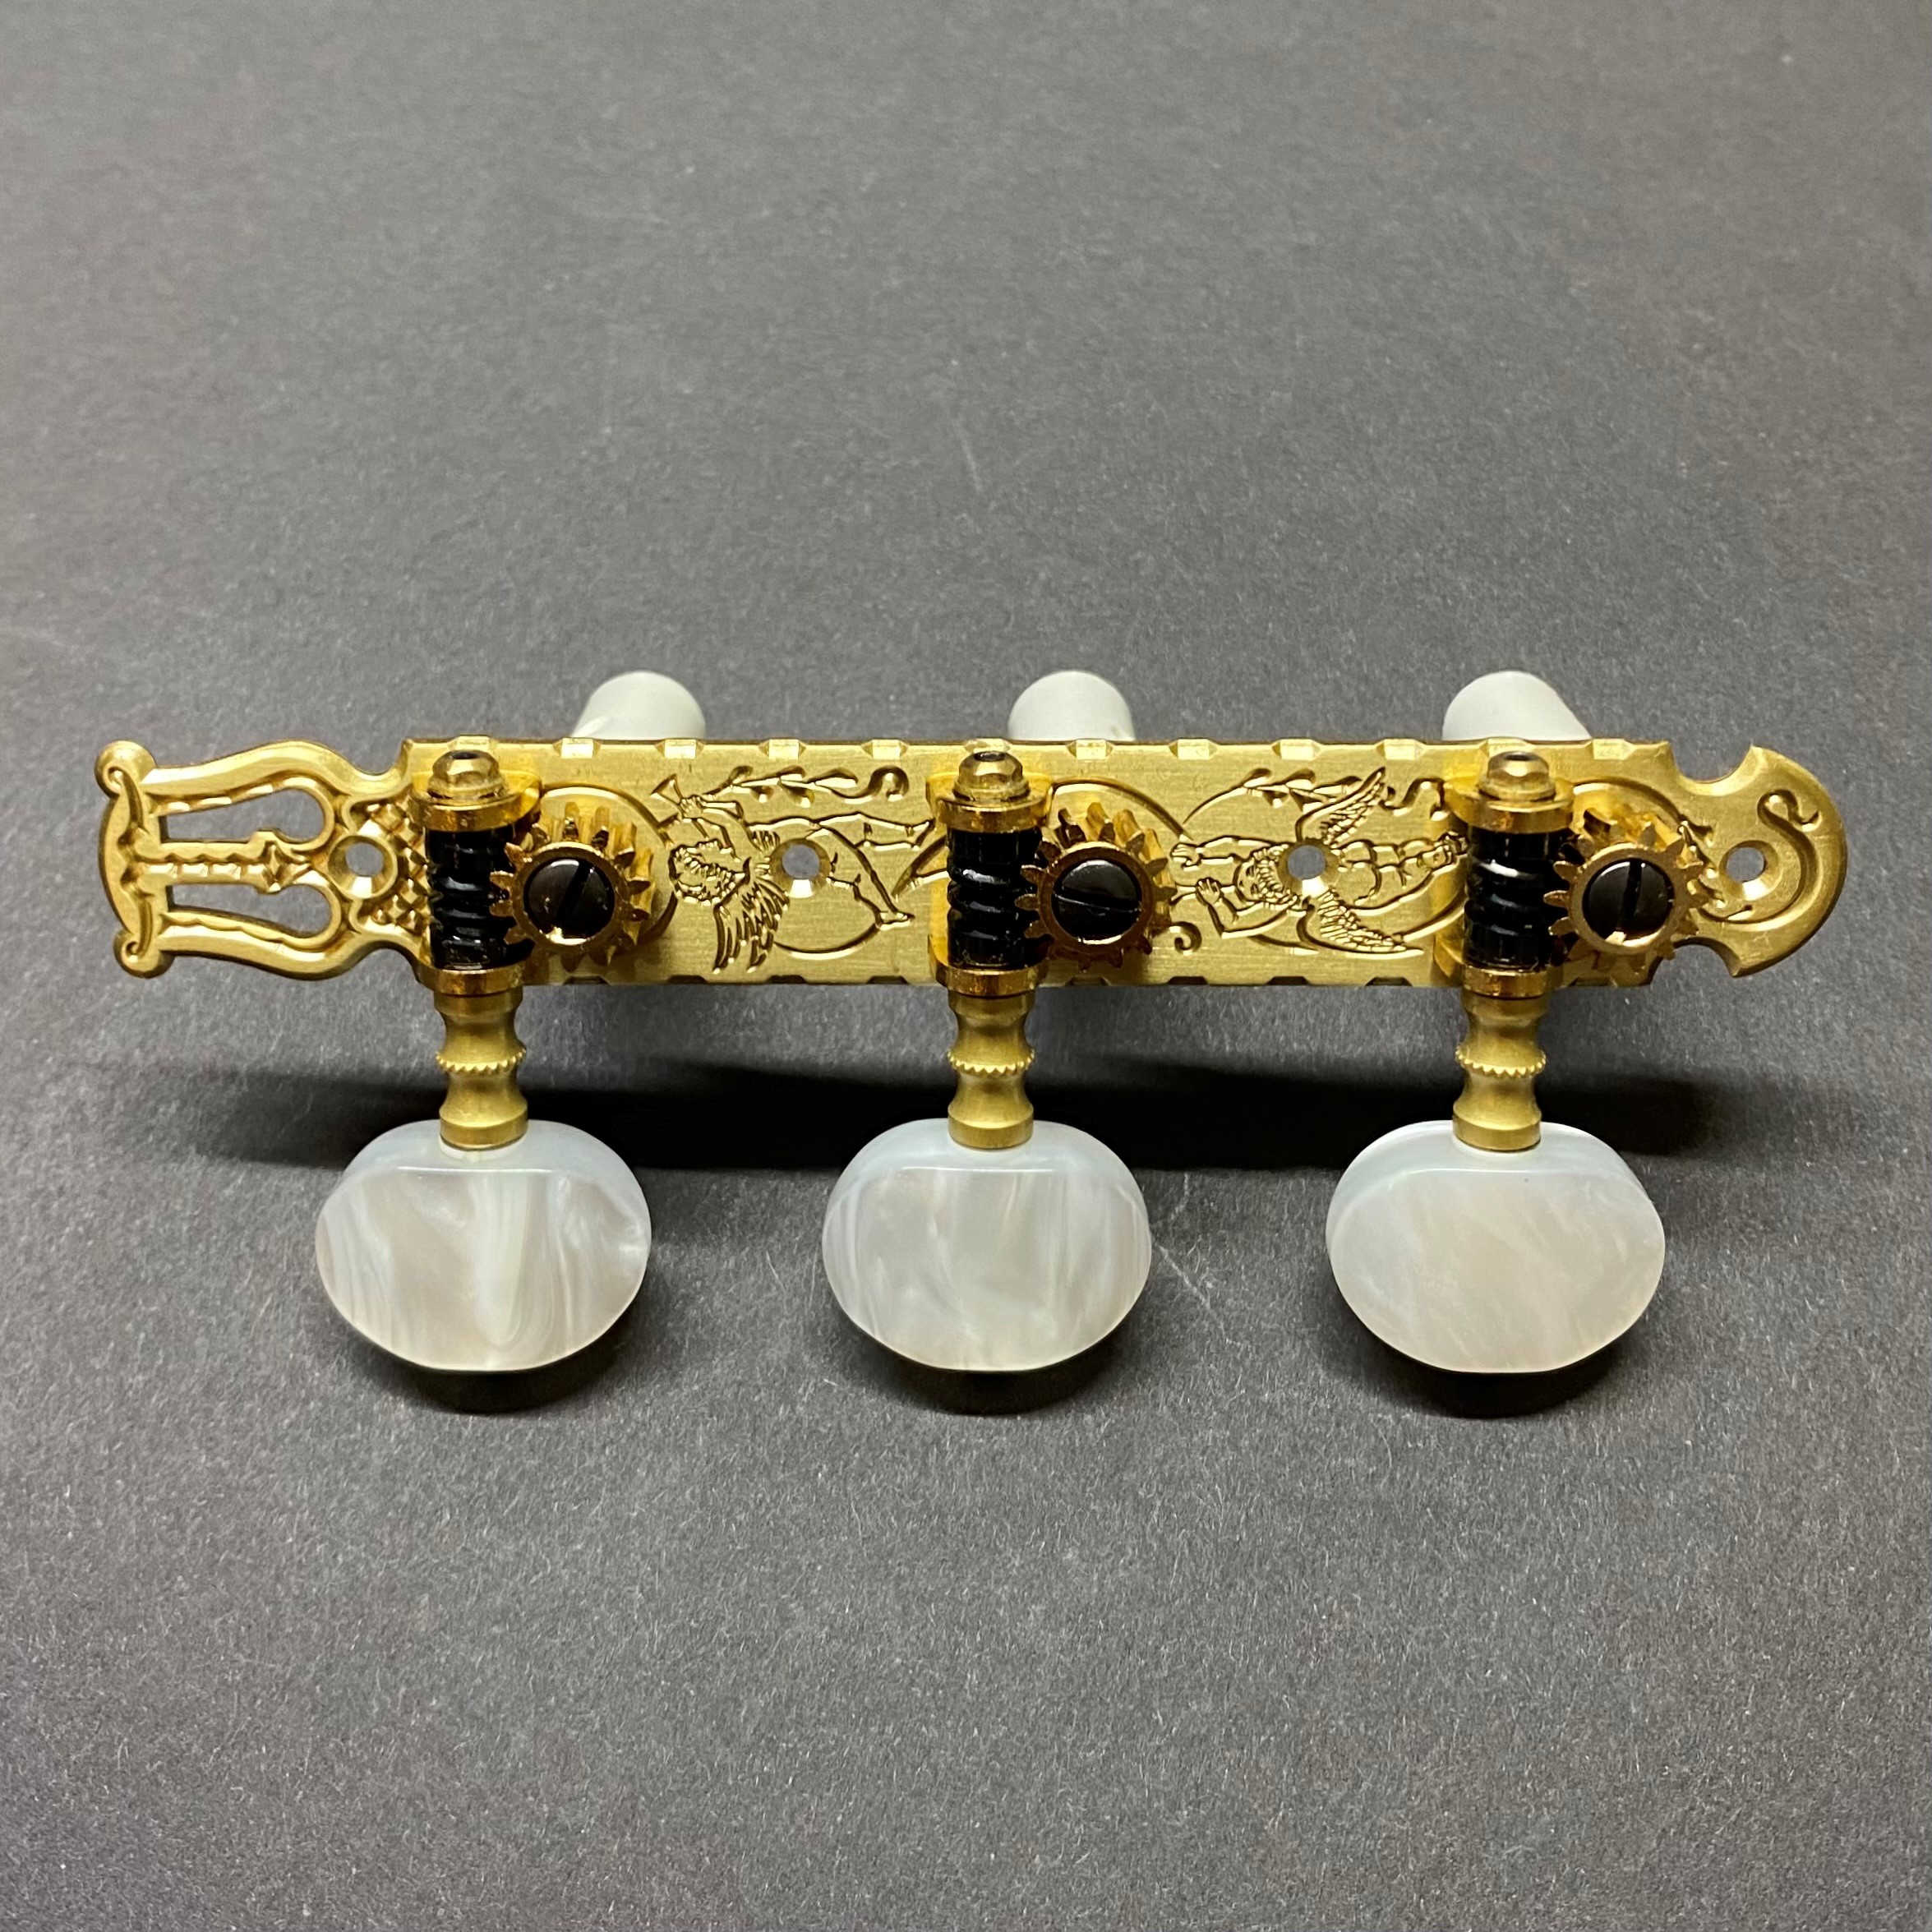 Gotoh Tuning Machine Buttons